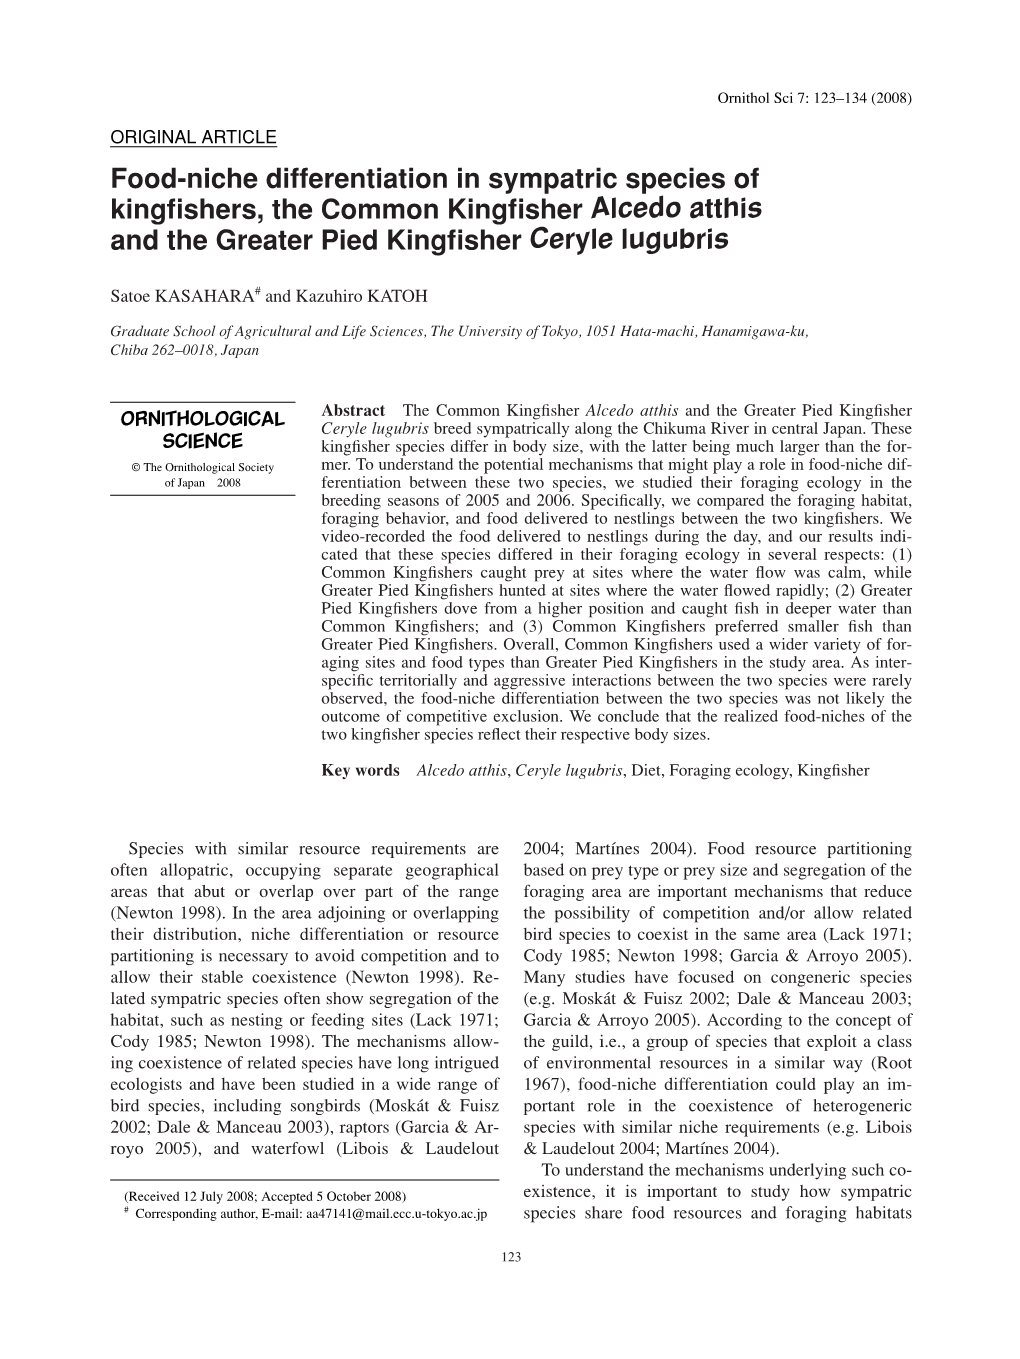 Food-Niche Differentiation in Sympatric Species of Kingfishers, The